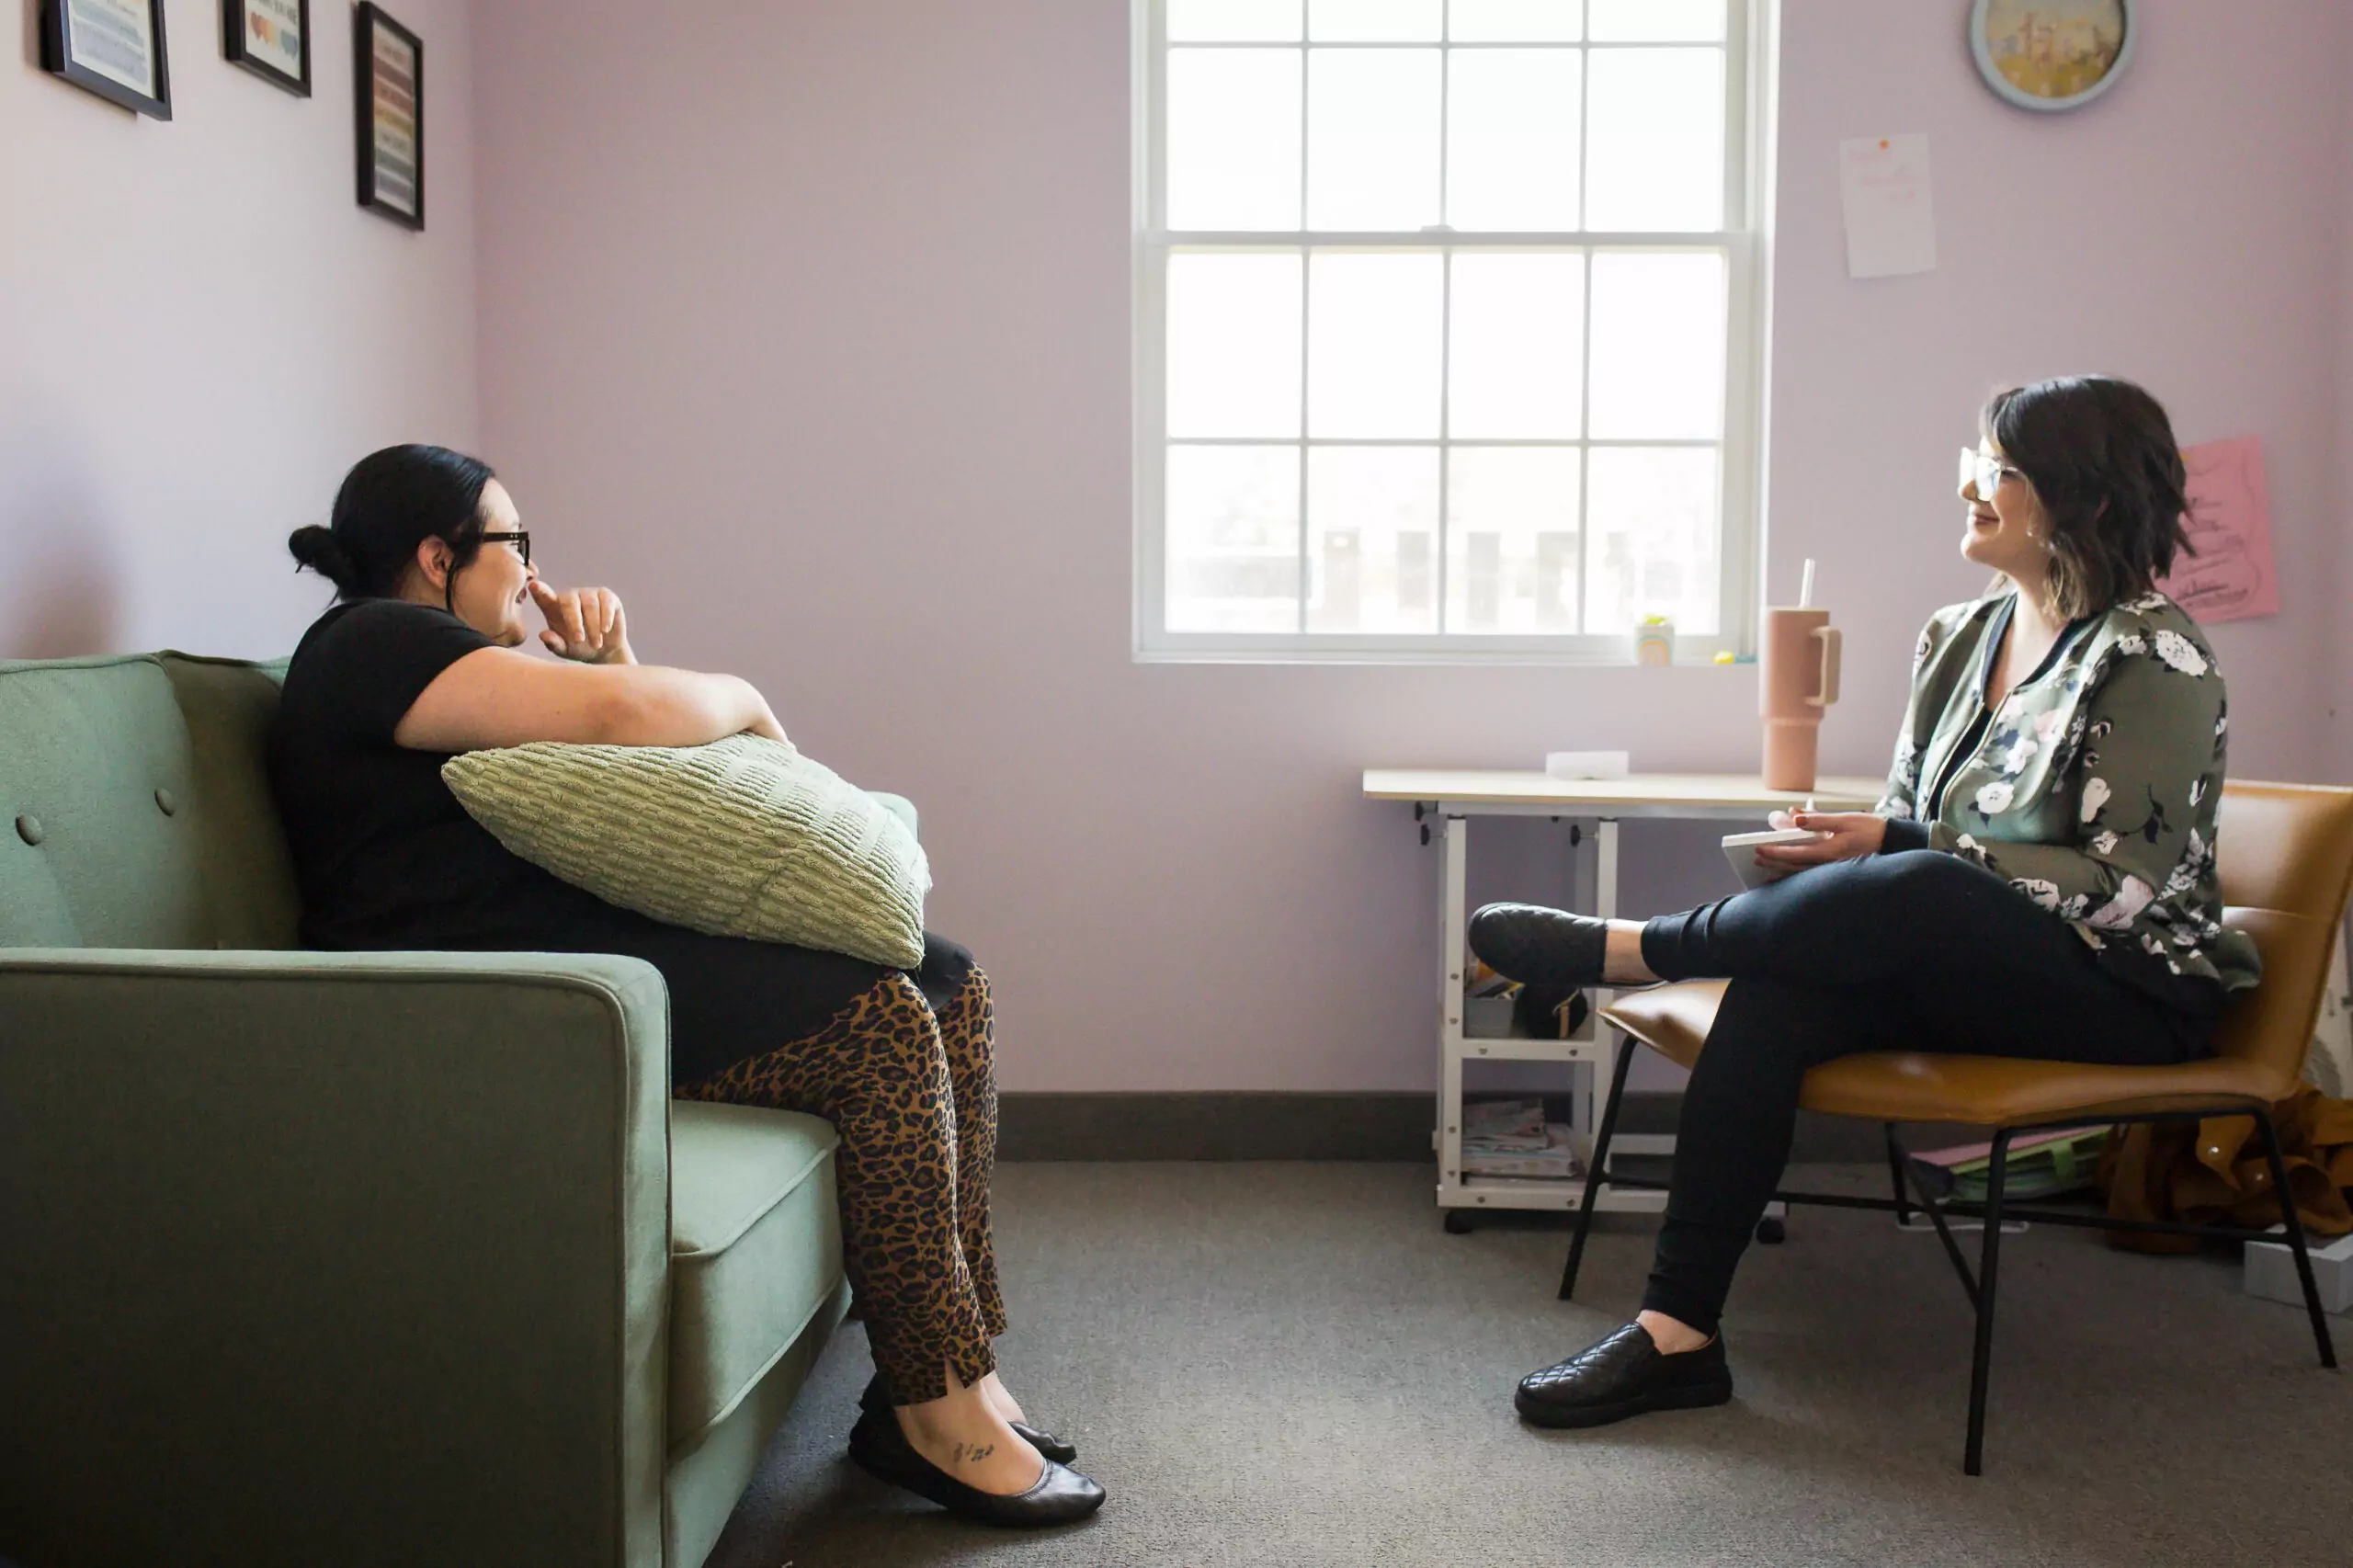 A female therapist sitting at right talks with a female client sitting on a couch at left. A window with sunlight is in the wall behind them.